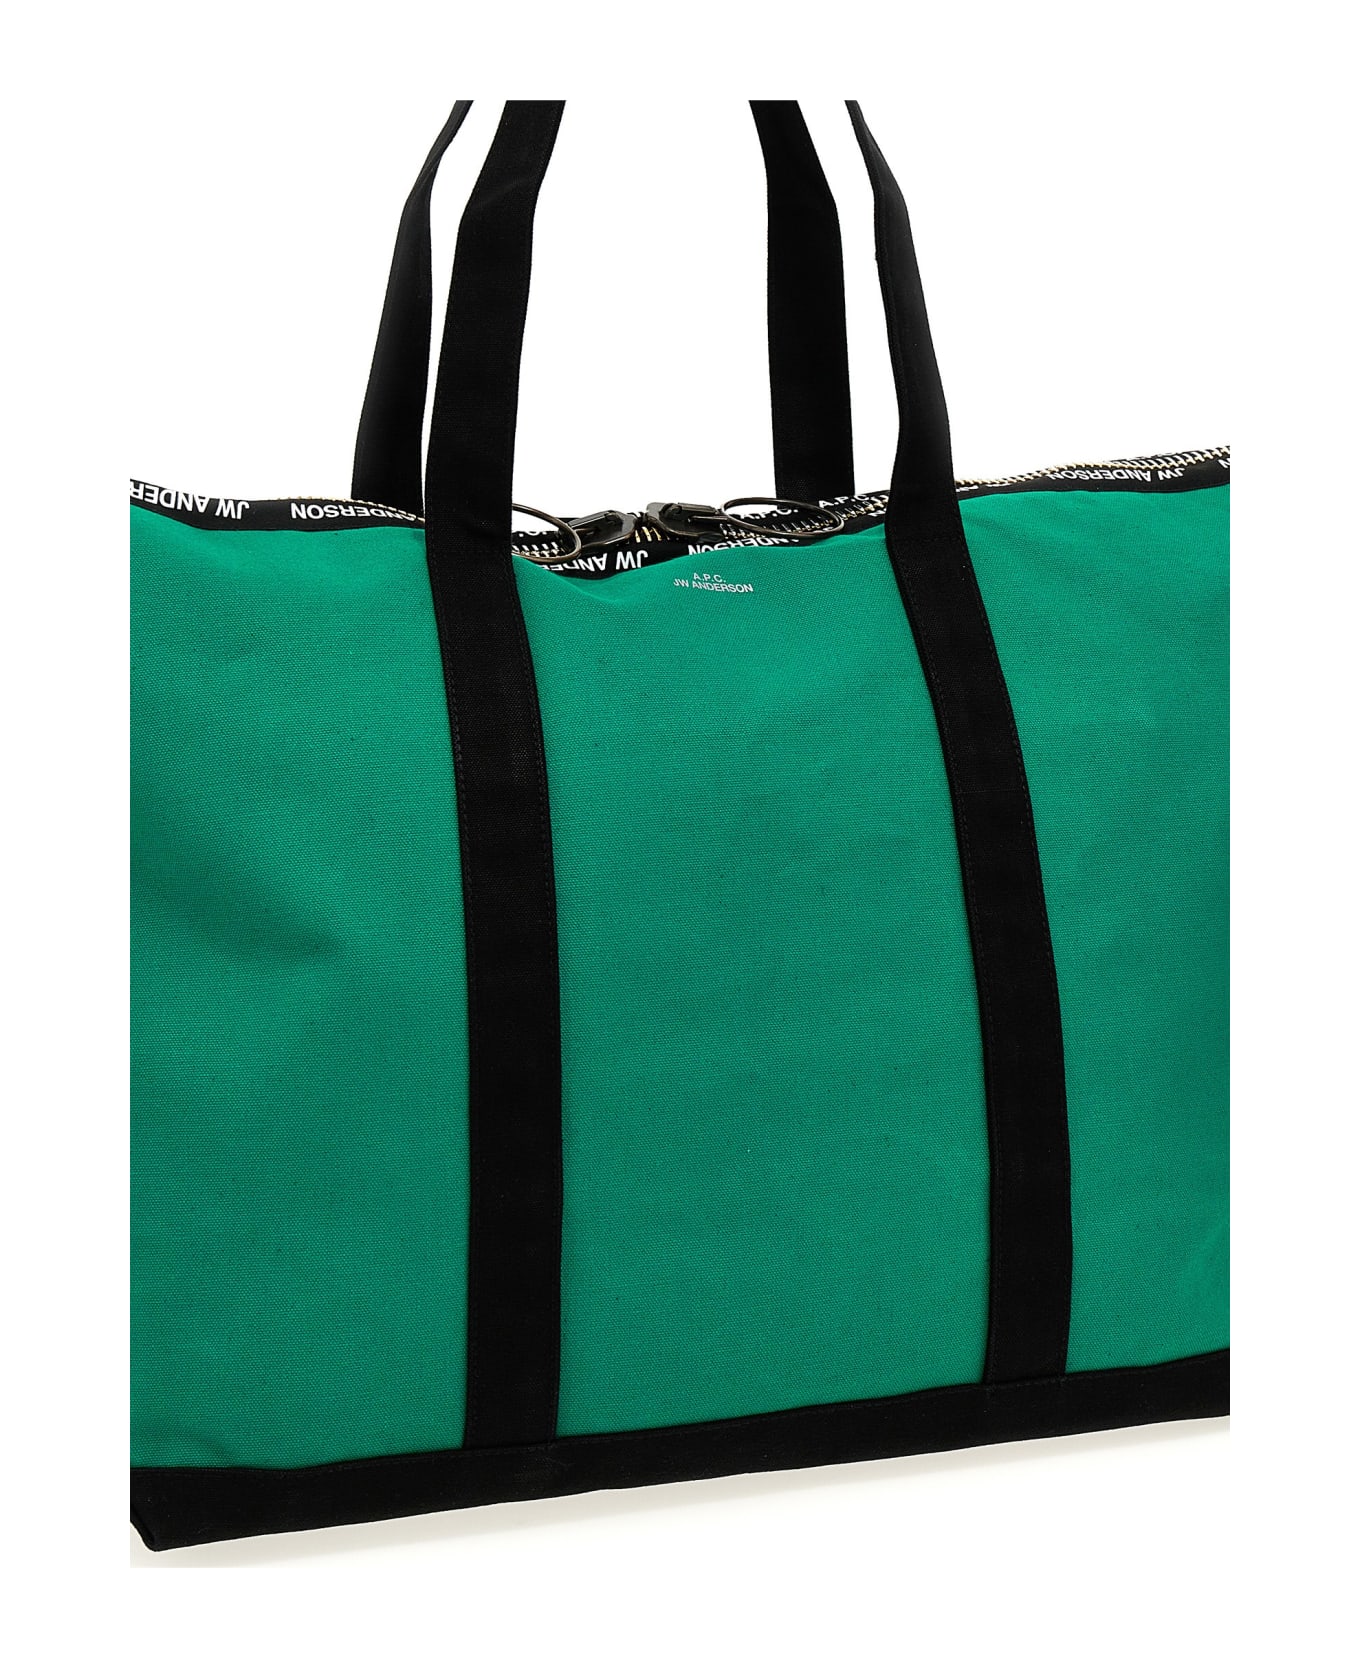 A.P.C. Tote Bag - Green トートバッグ